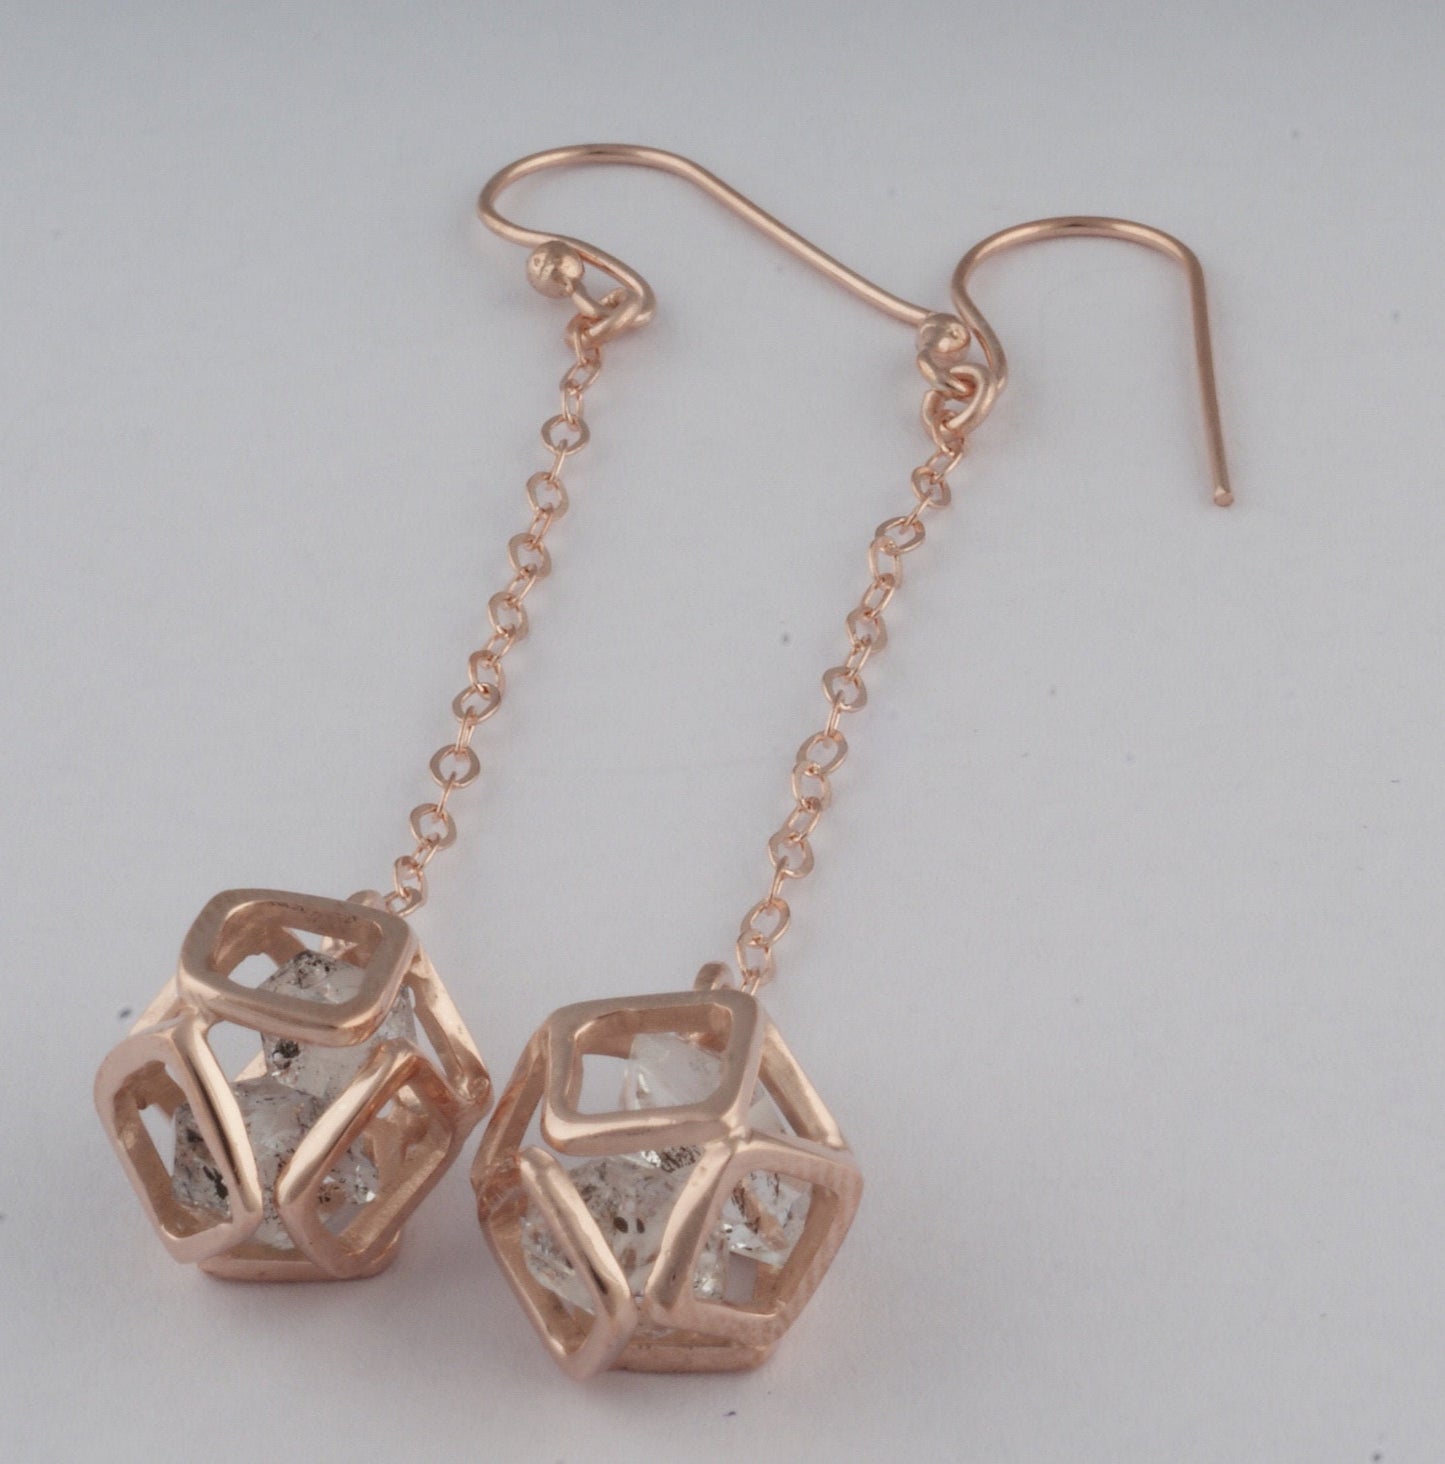 Solid 925 Sterling Silver Herkimer Diamond Cage Earrings Silver/Rose Gold Finish. April Birthstone, Gift for her. Woman/Girl, Anniversary.